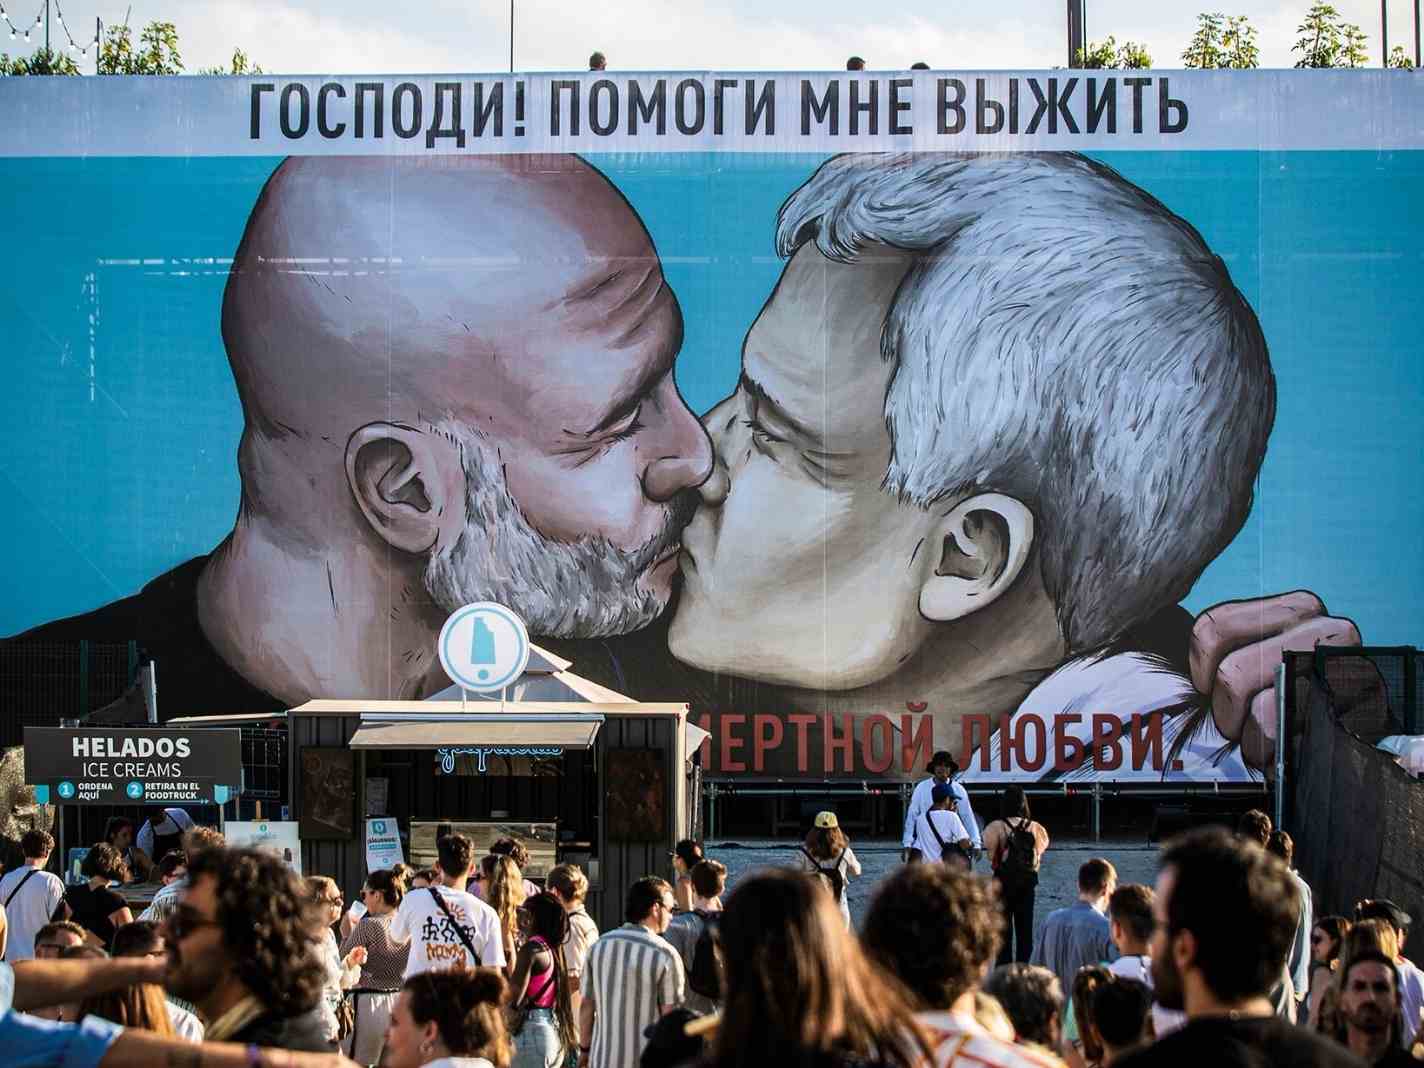 This mural of Jose Mourinho and Pep Guardiola kissing is unsettling AF